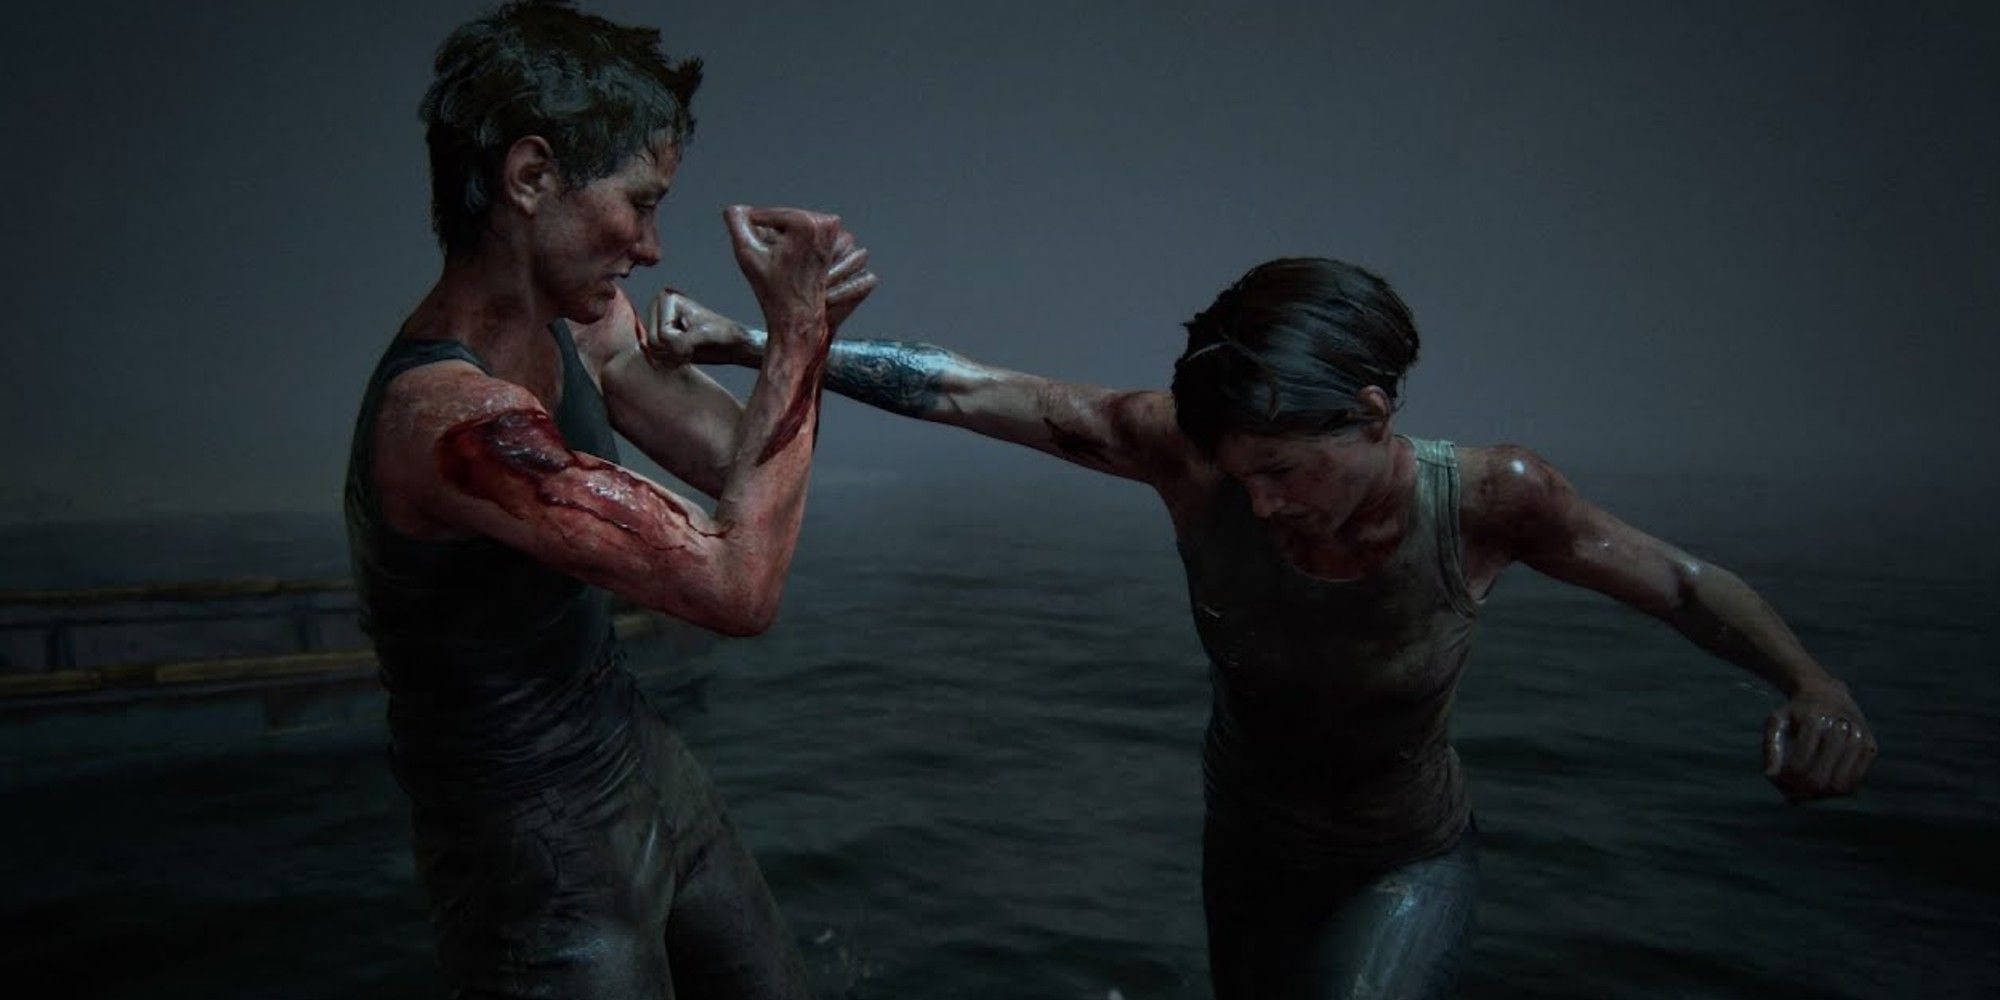 Ellie punching Abby in the shoulder against a stormy grey background during TLOU 2's ending.